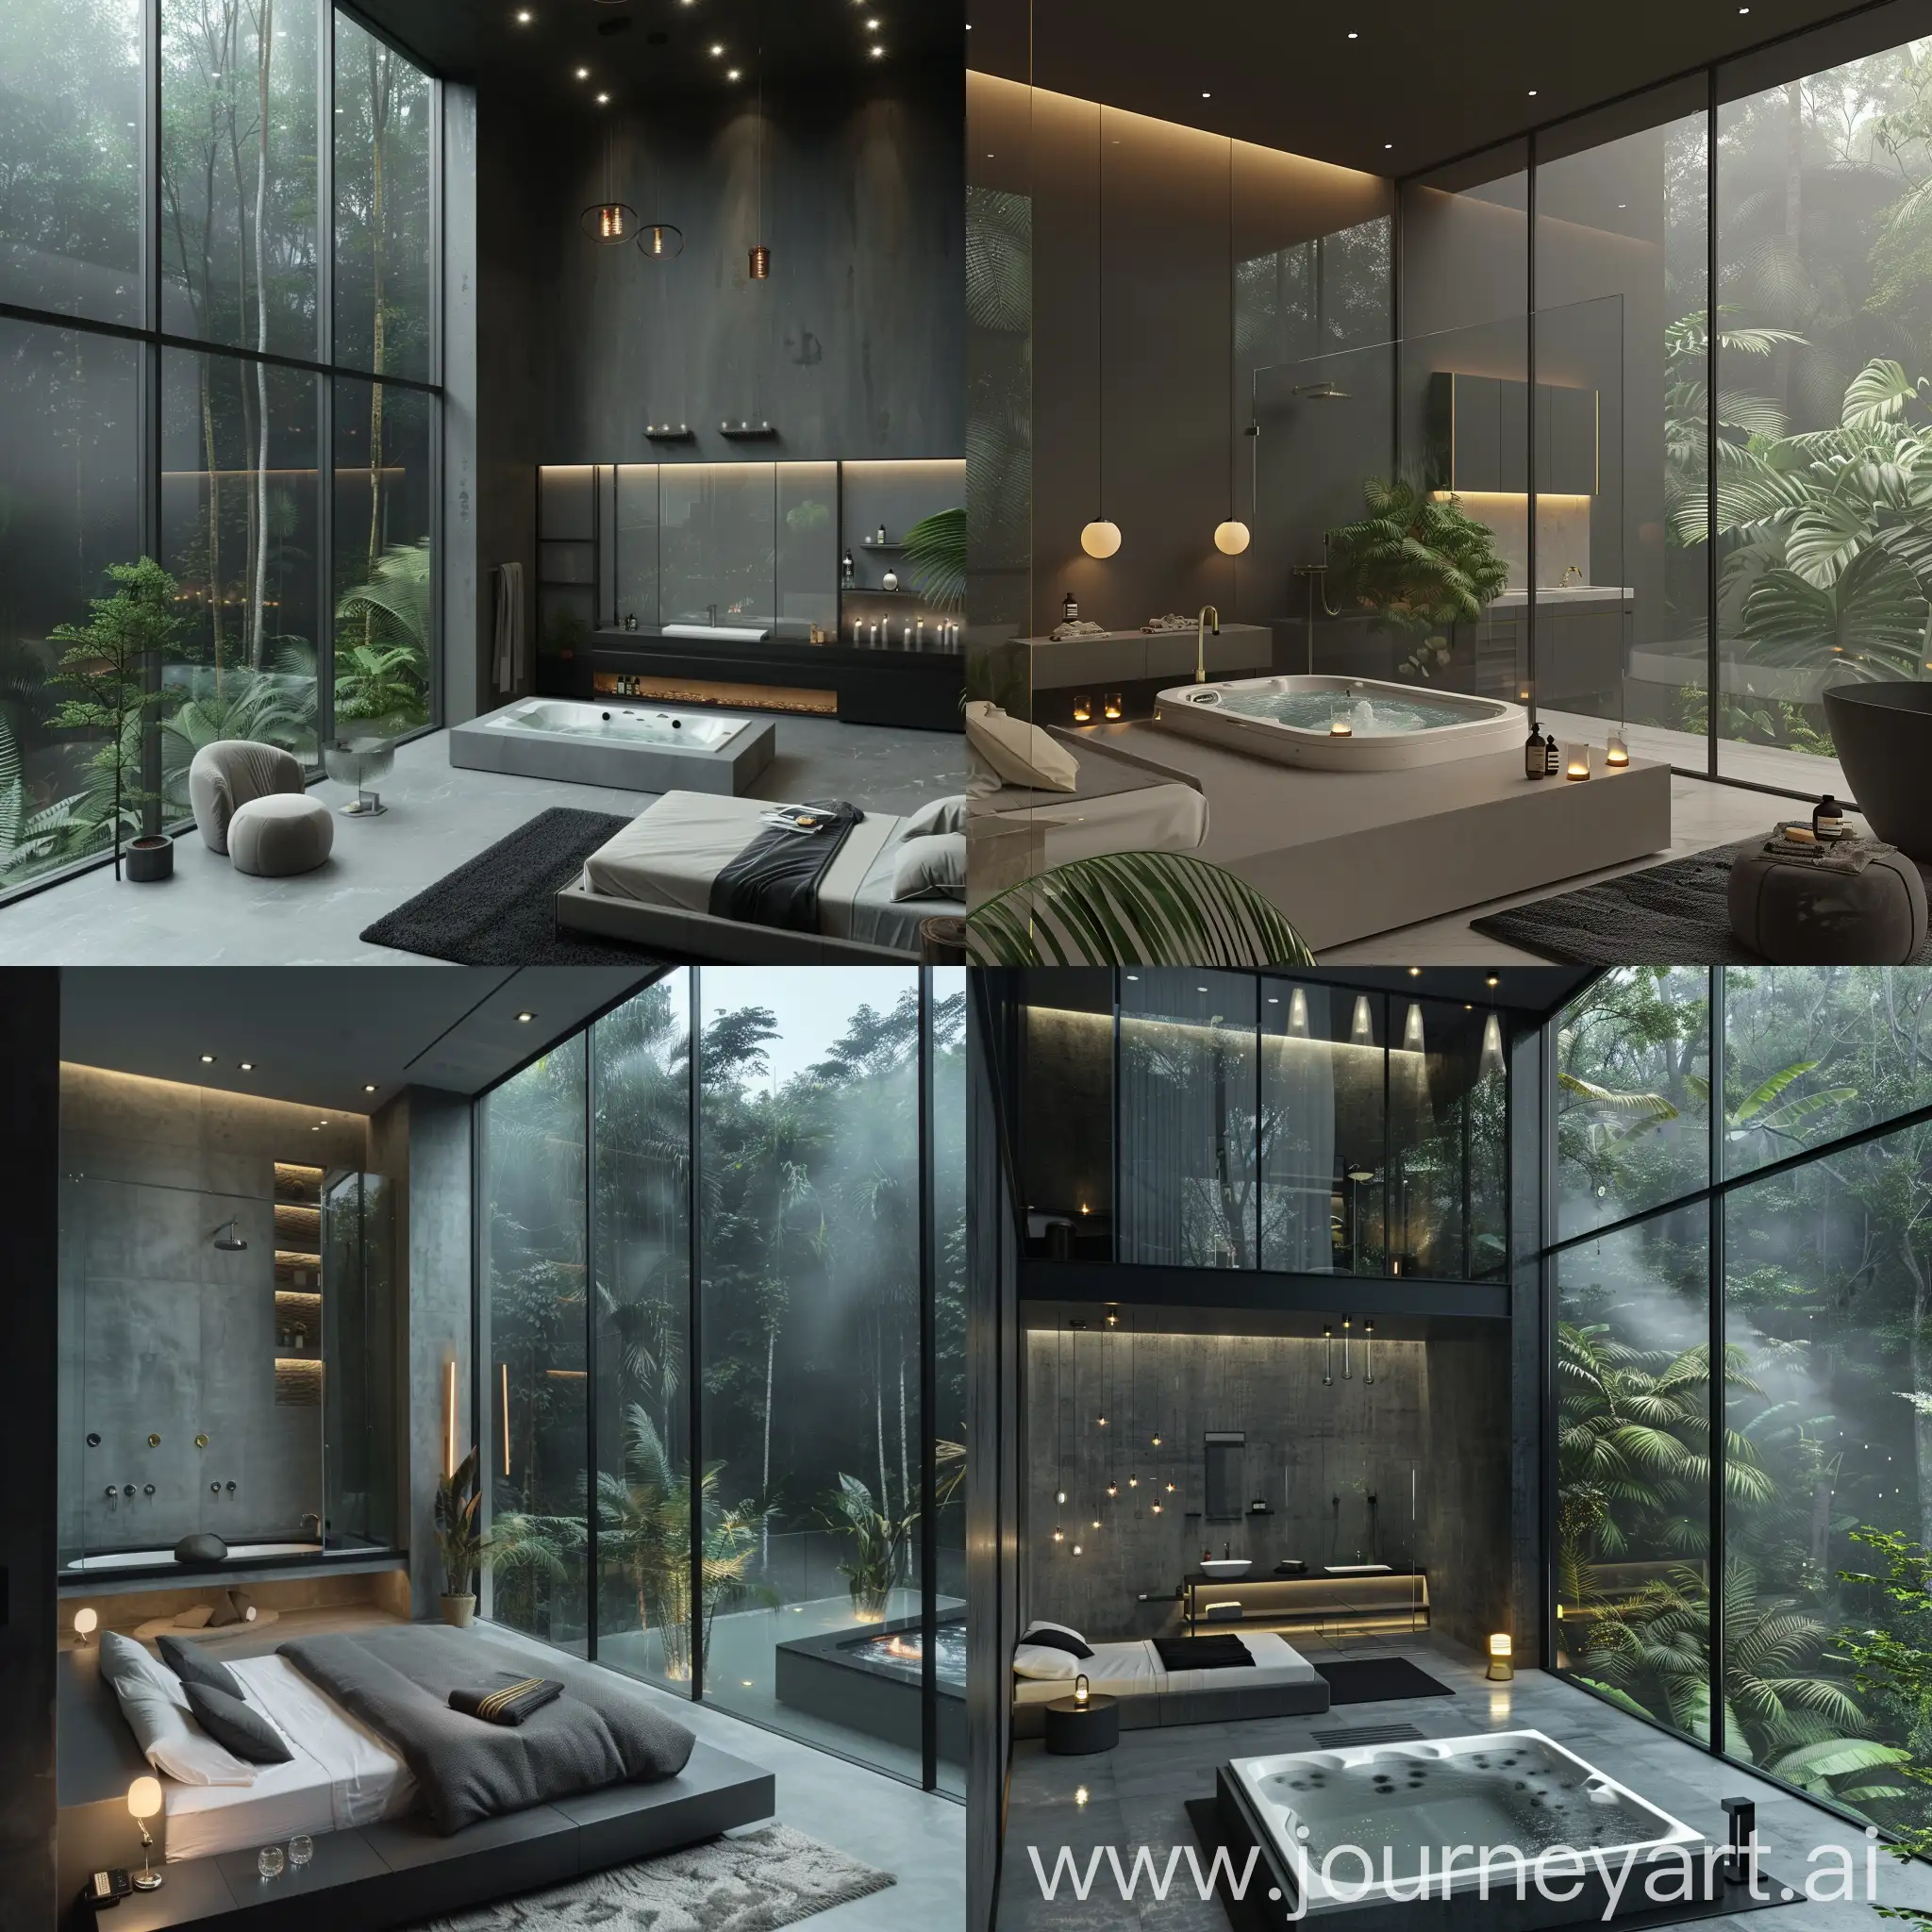 Modern-Minimalist-Bedroom-with-Glass-Bathroom-and-Jacuzzi-in-Tropical-Forest